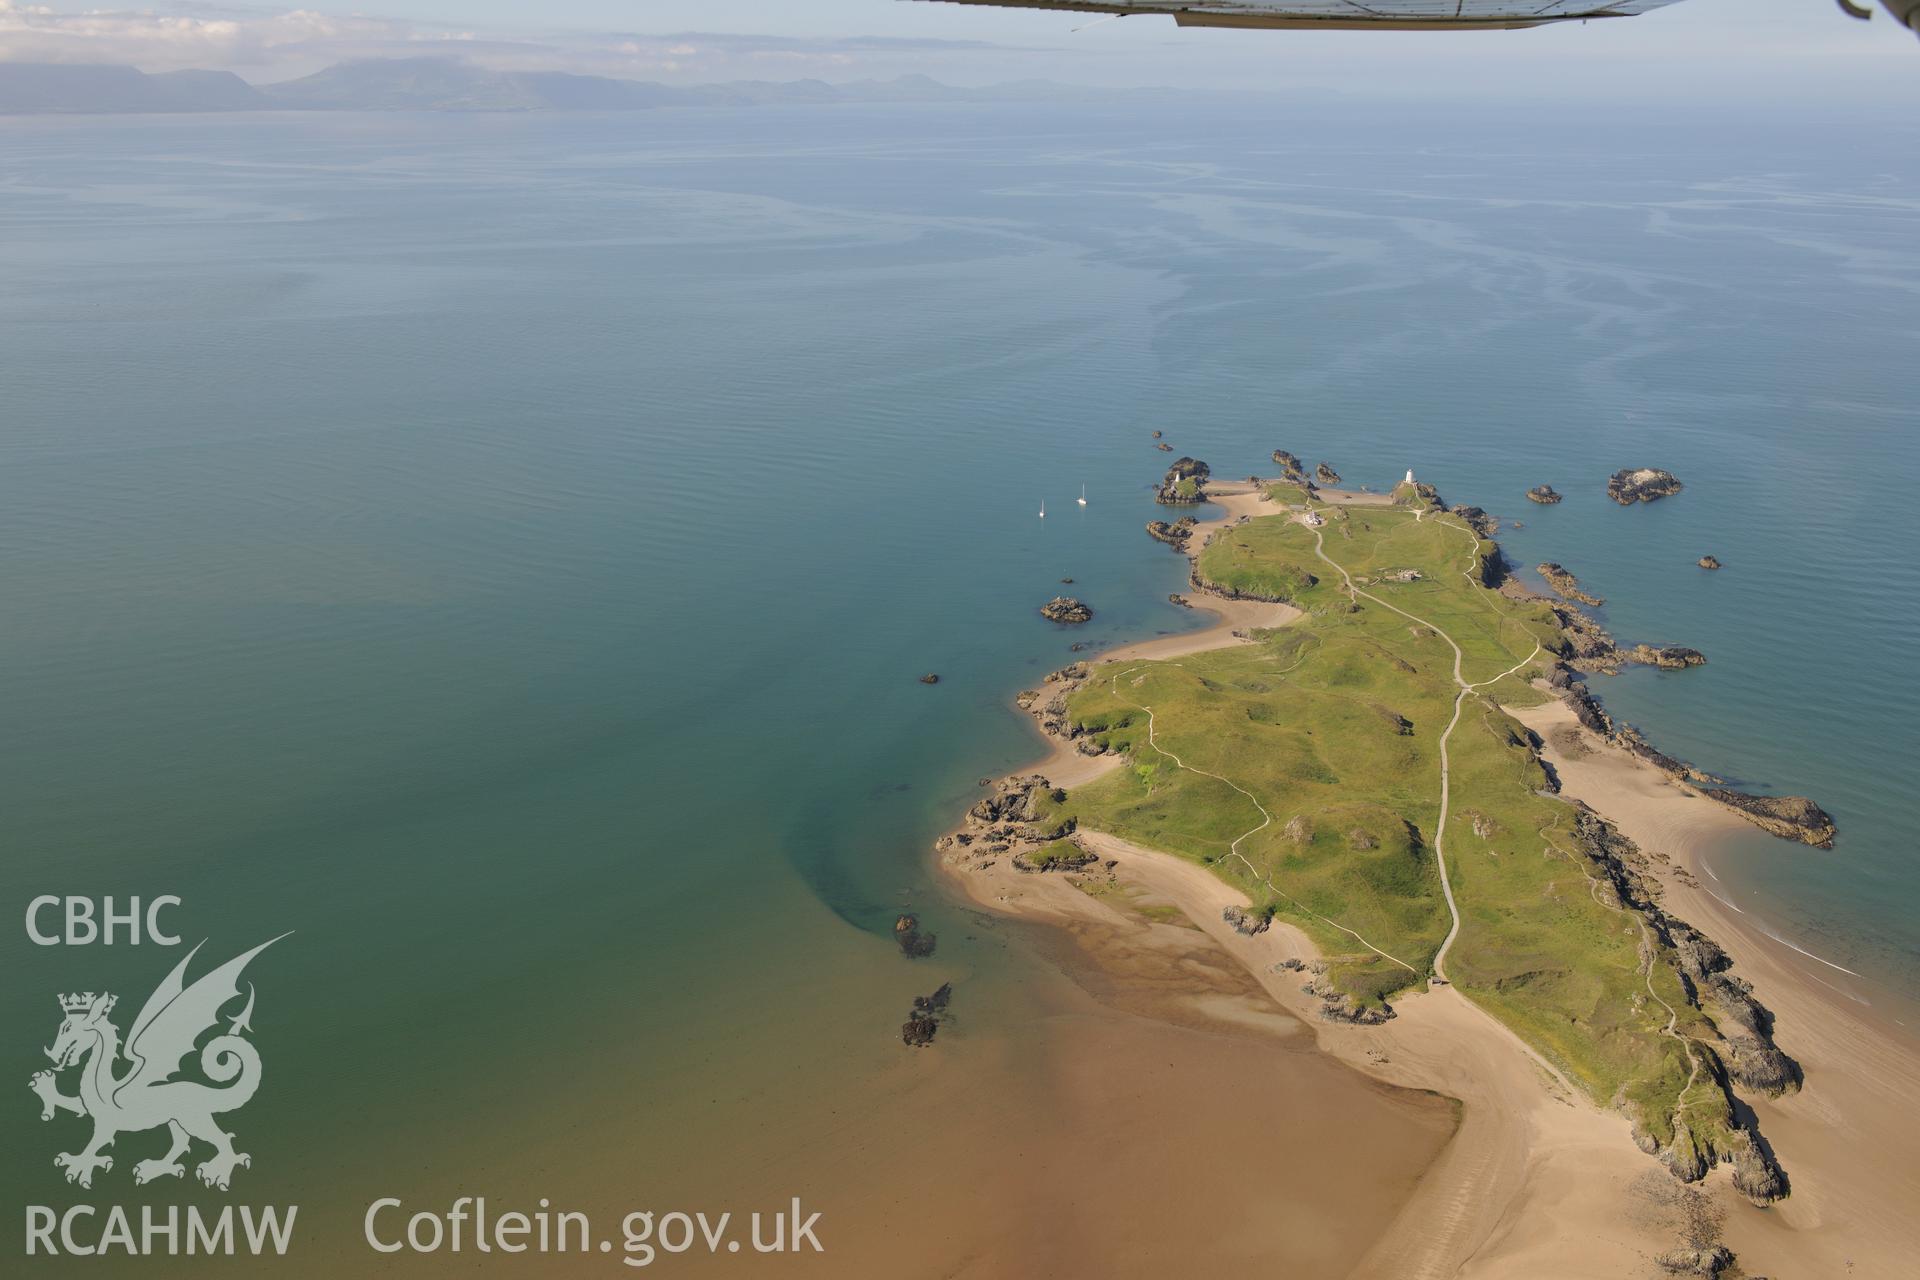 The lighthouse, pilot's house and St. Dwynwen's Church on Llanddwyn Island. Oblique aerial photograph taken during the Royal Commission's programme of archaeological aerial reconnaissance by Toby Driver on 23rd June 2015.